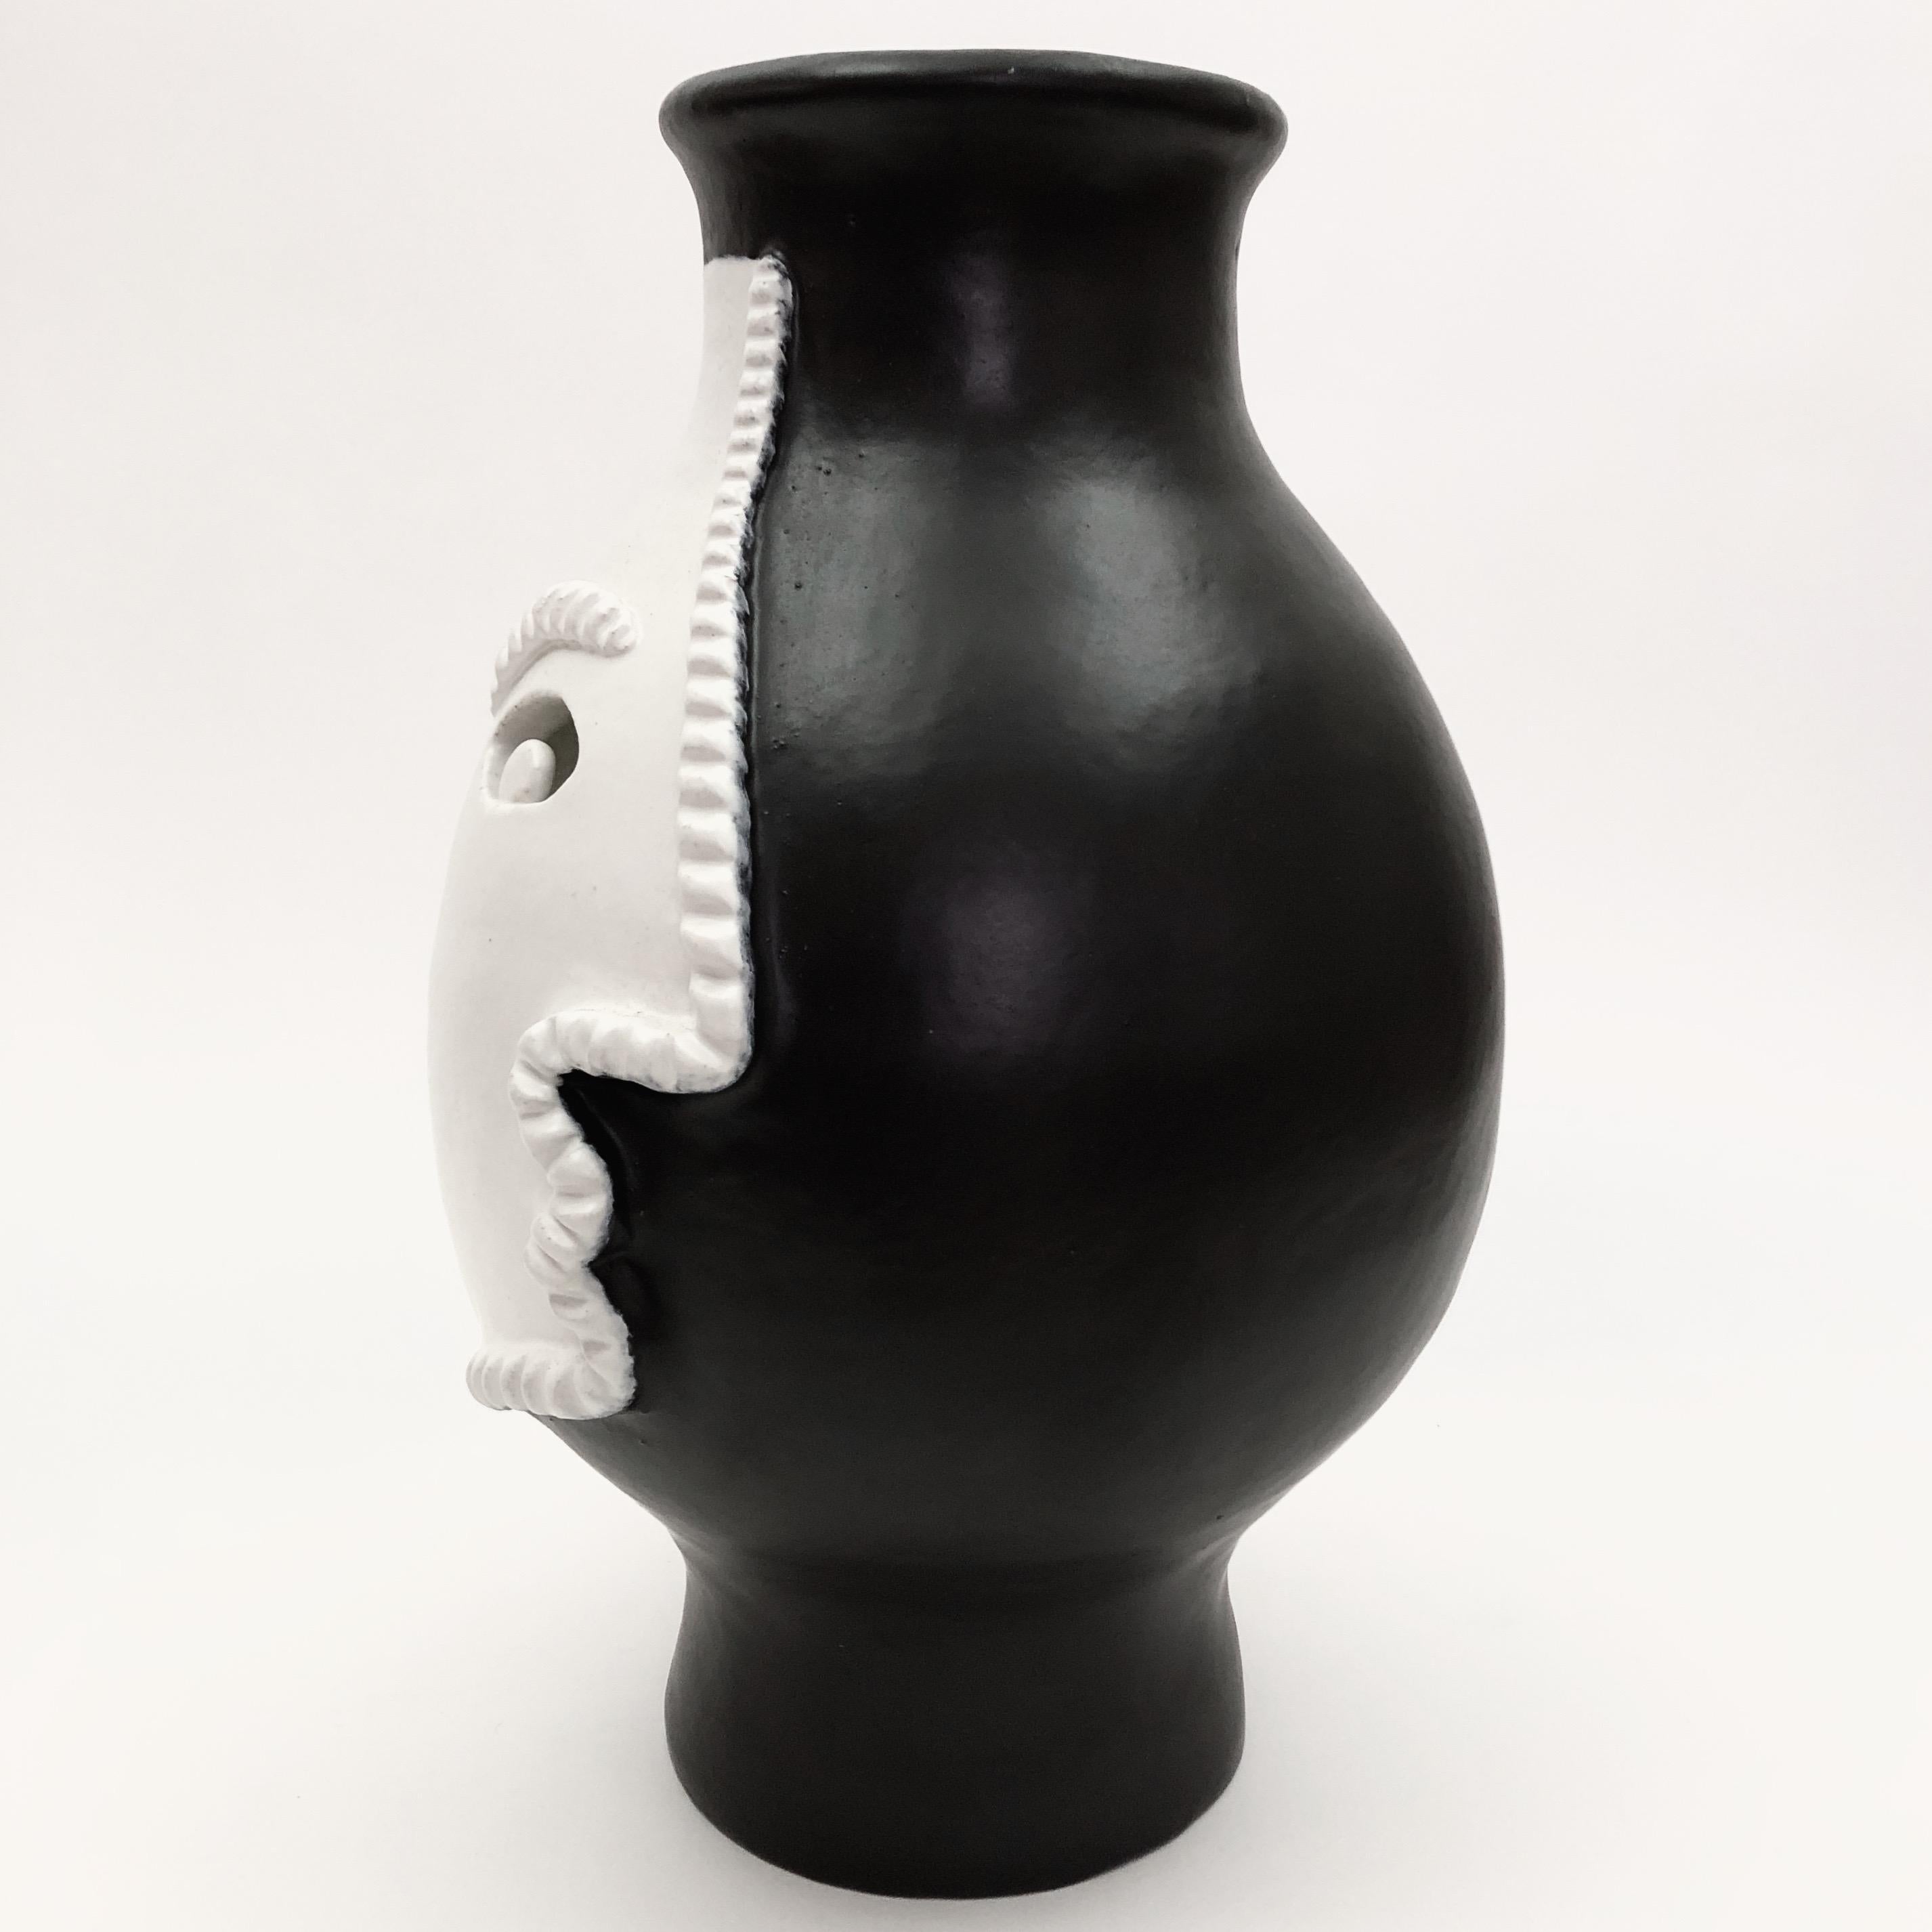 Impressive sculptural piece forming a large baluster vase
Ceramic glazed in matt black and white, decorated with a stylized visage incised and sculpted. 
One of a kind handmade piece designed and signed by the French artists and ceramicists: Dalo.